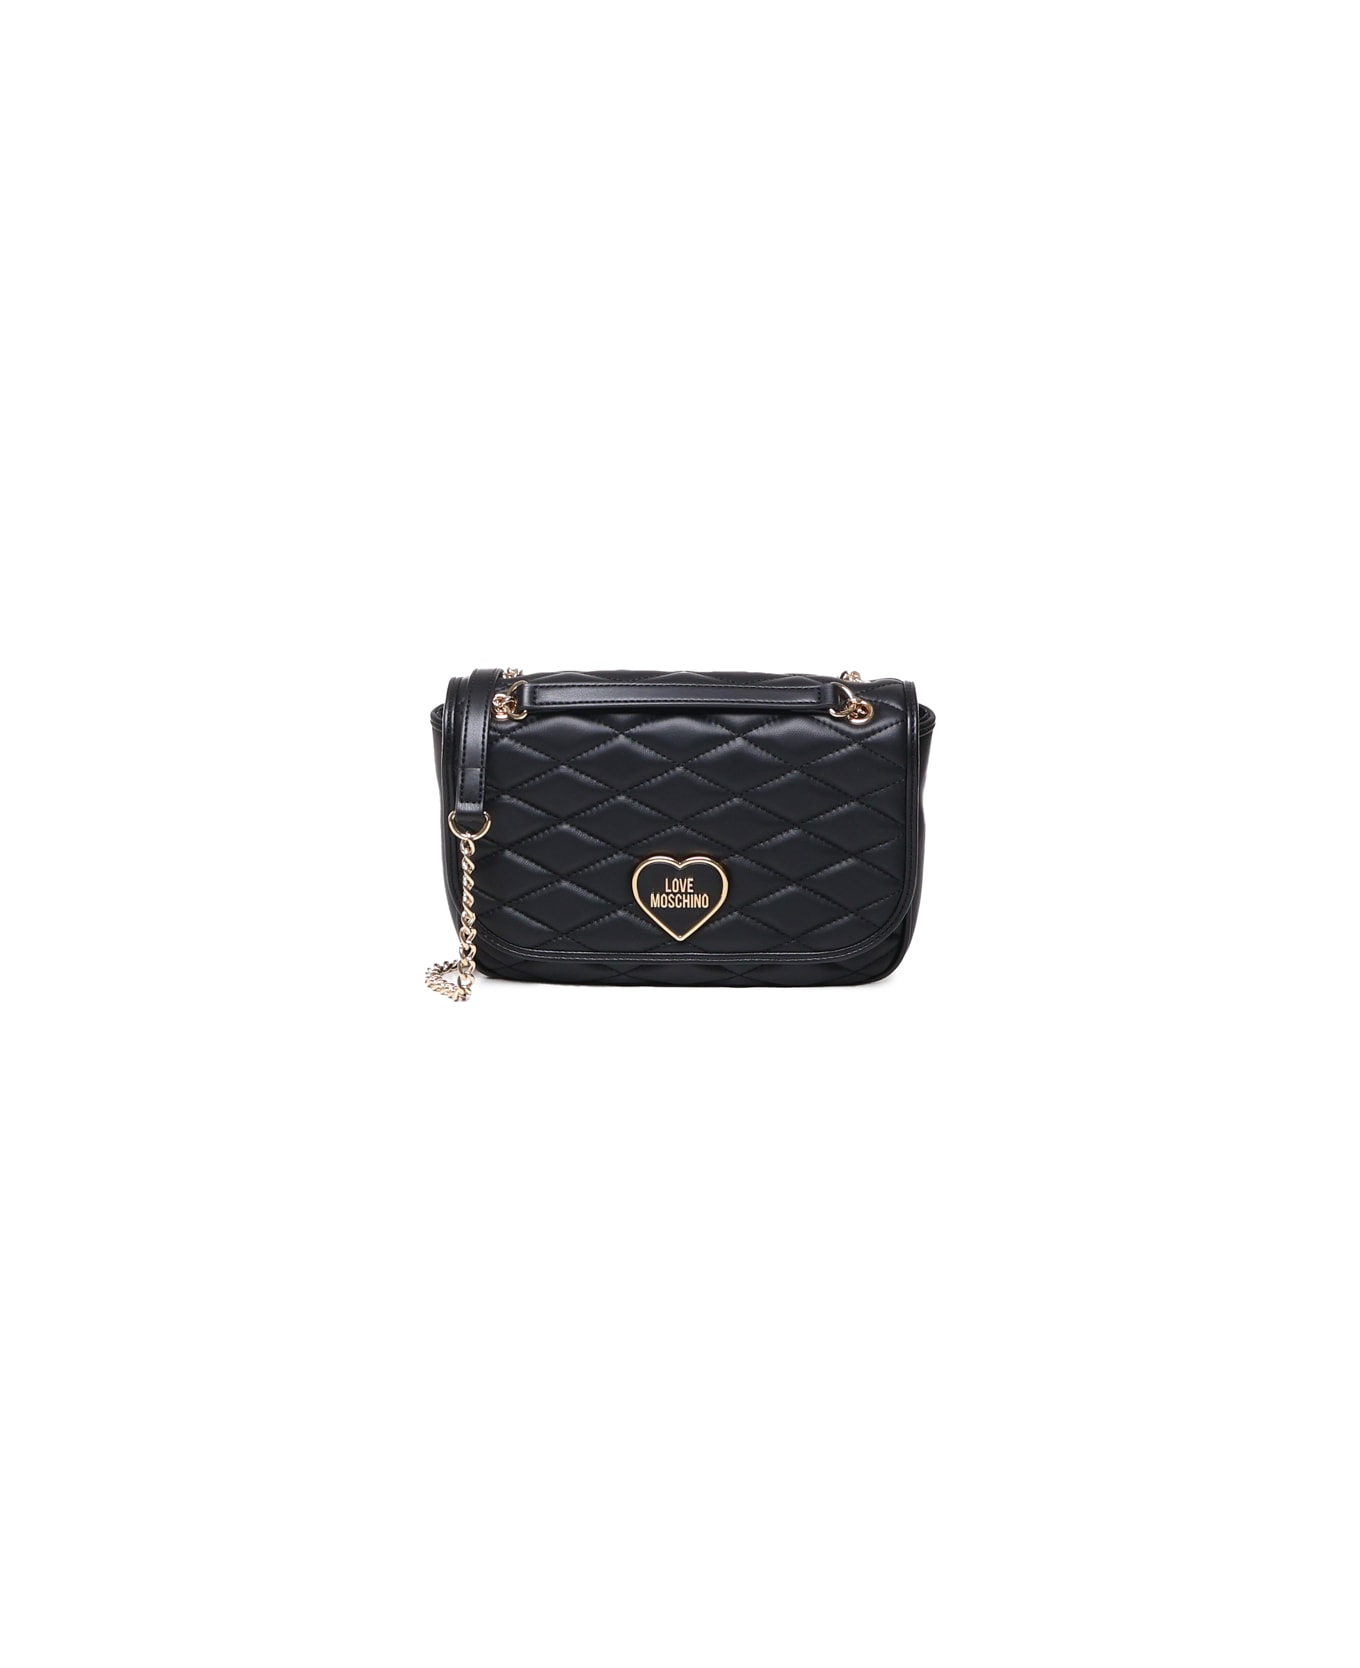 Love Moschino Quilted Shoulder Bag - Black